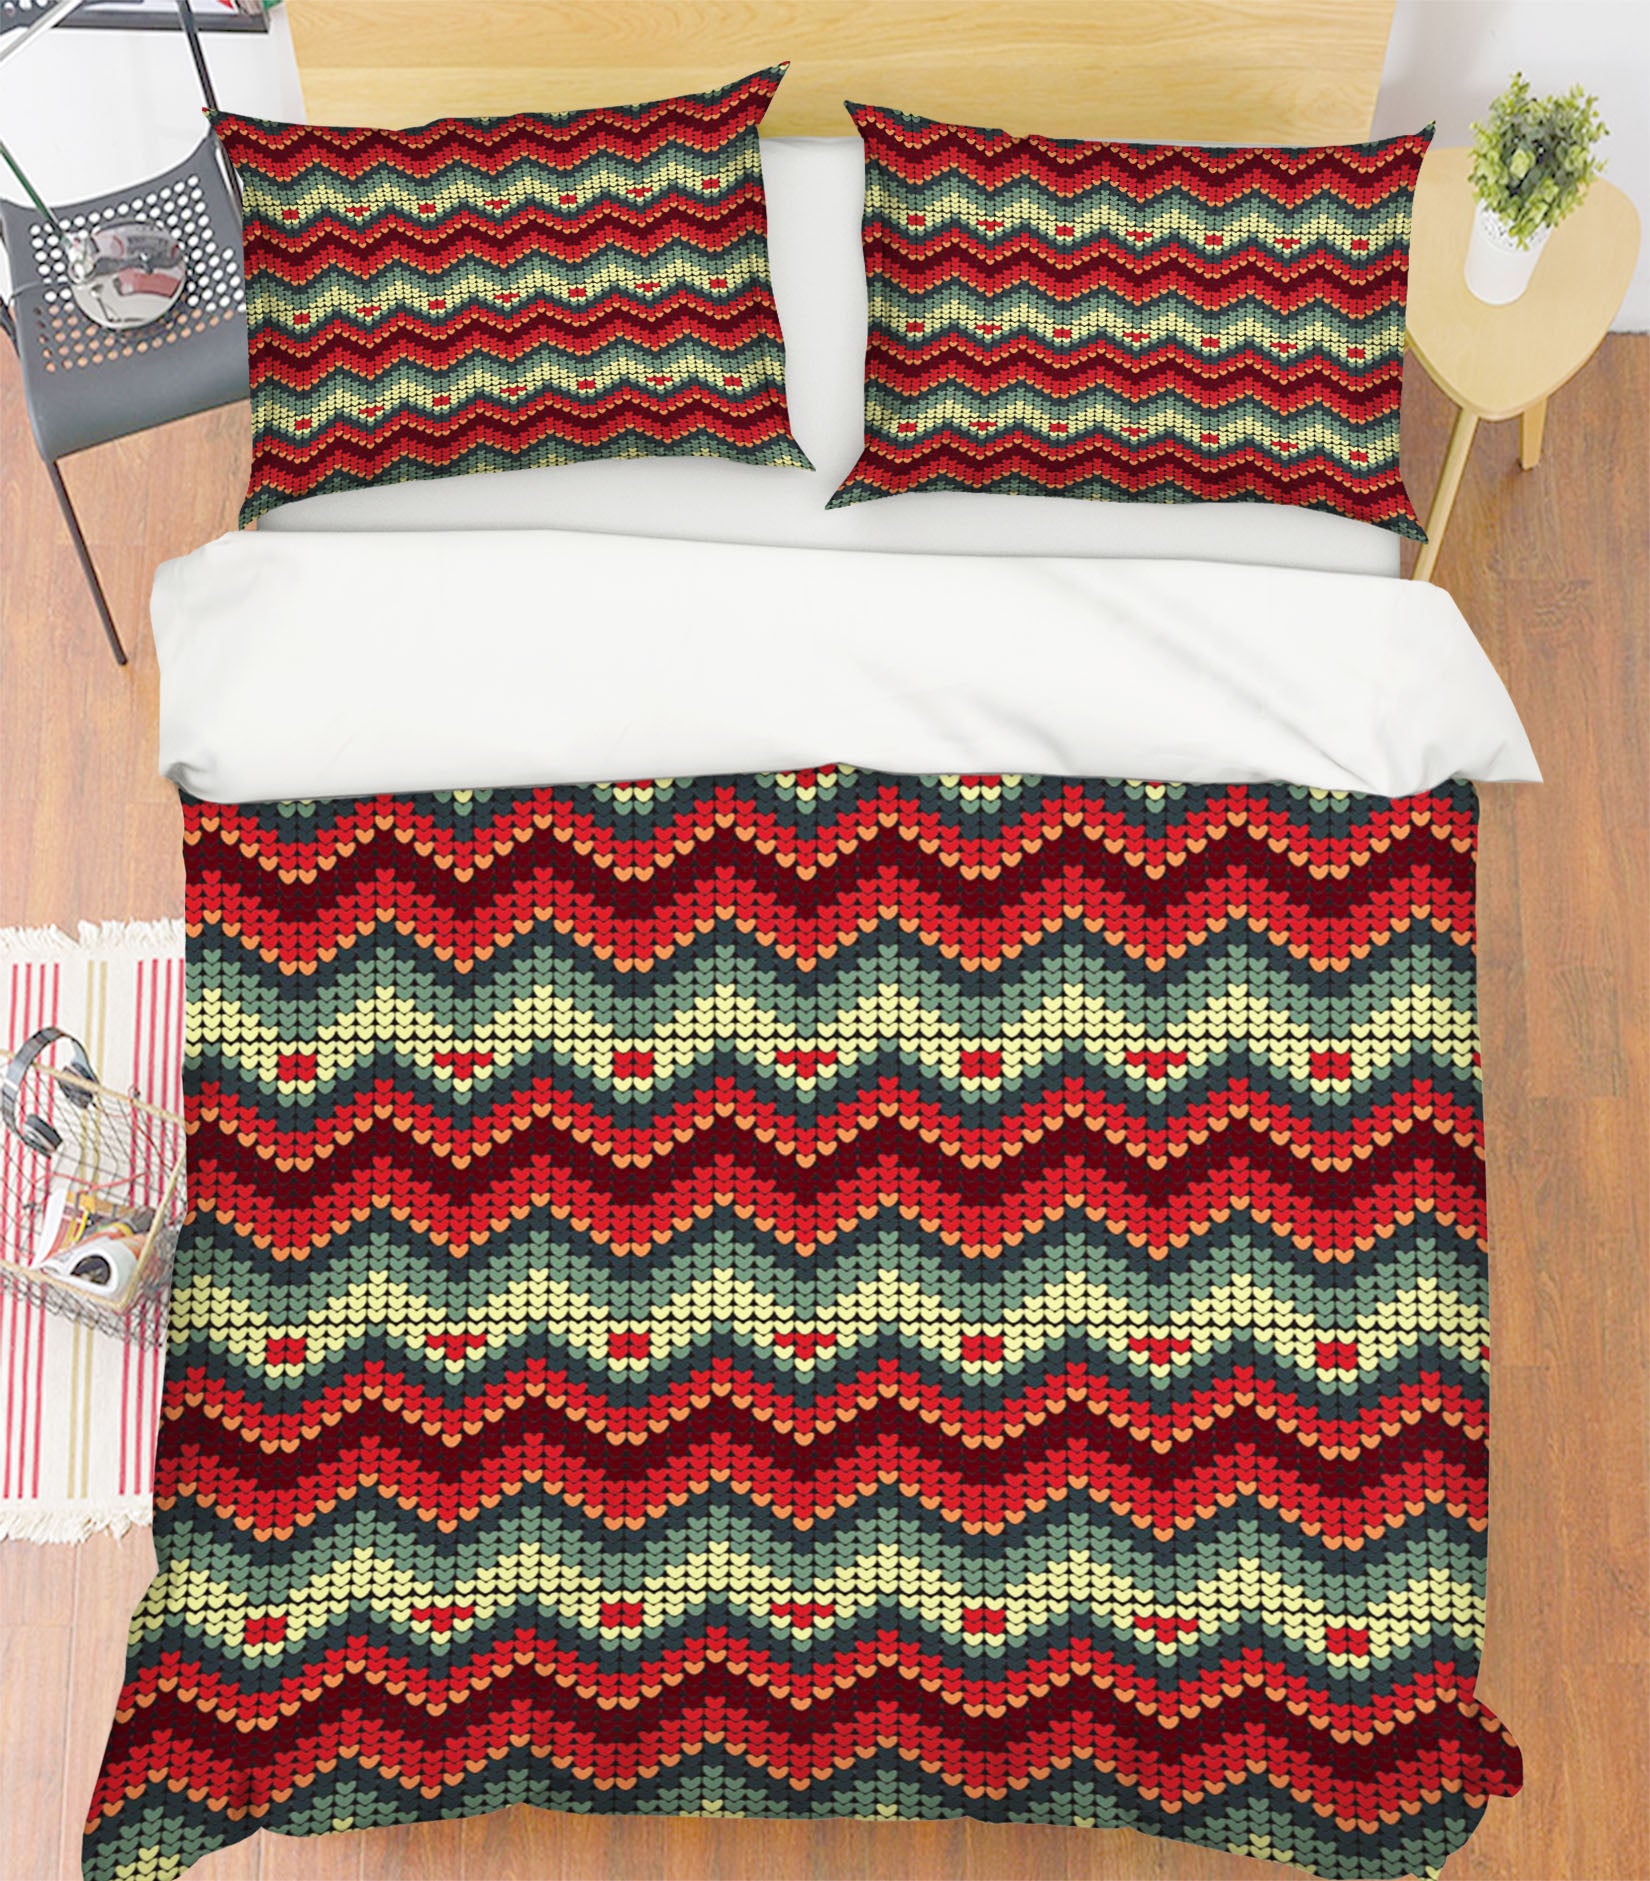 3D Wave Pattern 31112 Christmas Quilt Duvet Cover Xmas Bed Pillowcases